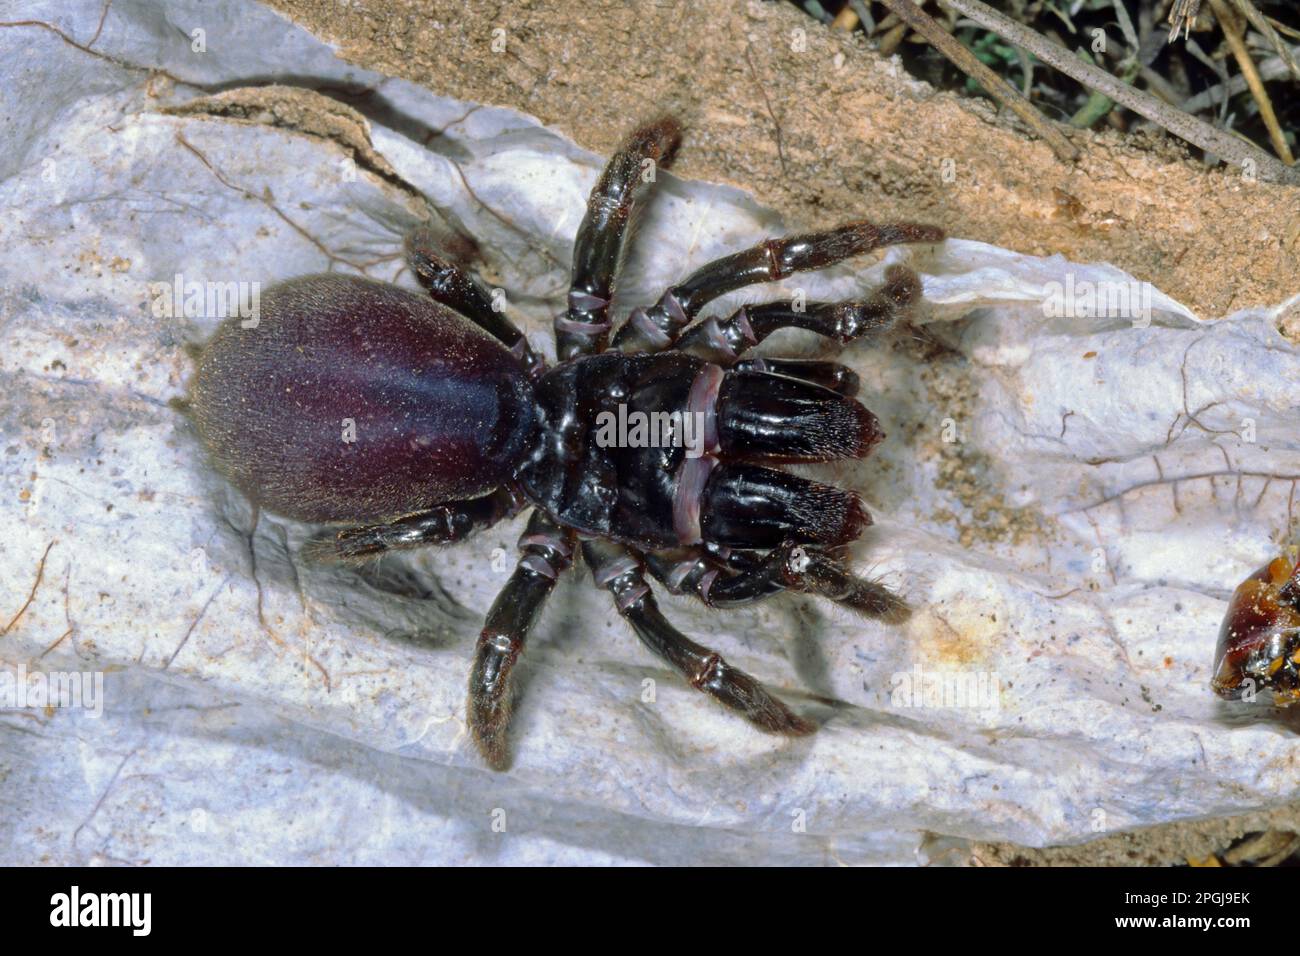 purse-web spider (Atypus affinis), sitting on open catching tube, Germany Stock Photo